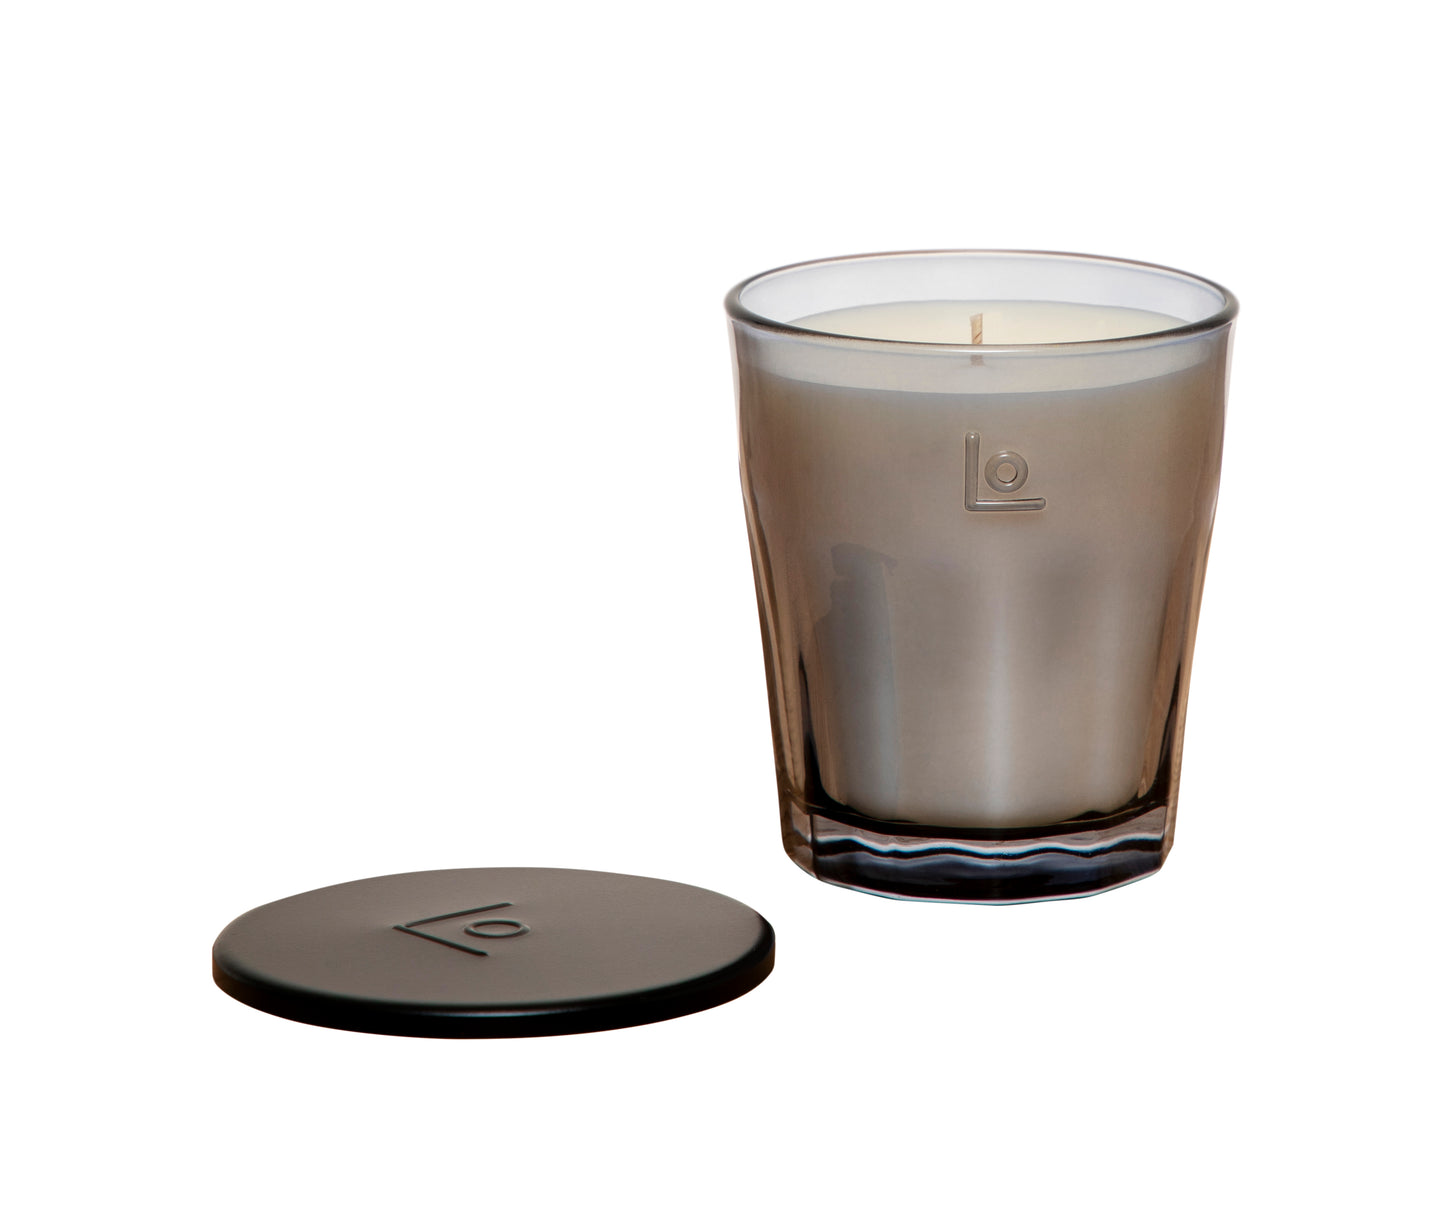 LO. Studio Ember Remember 220g Scented Candle